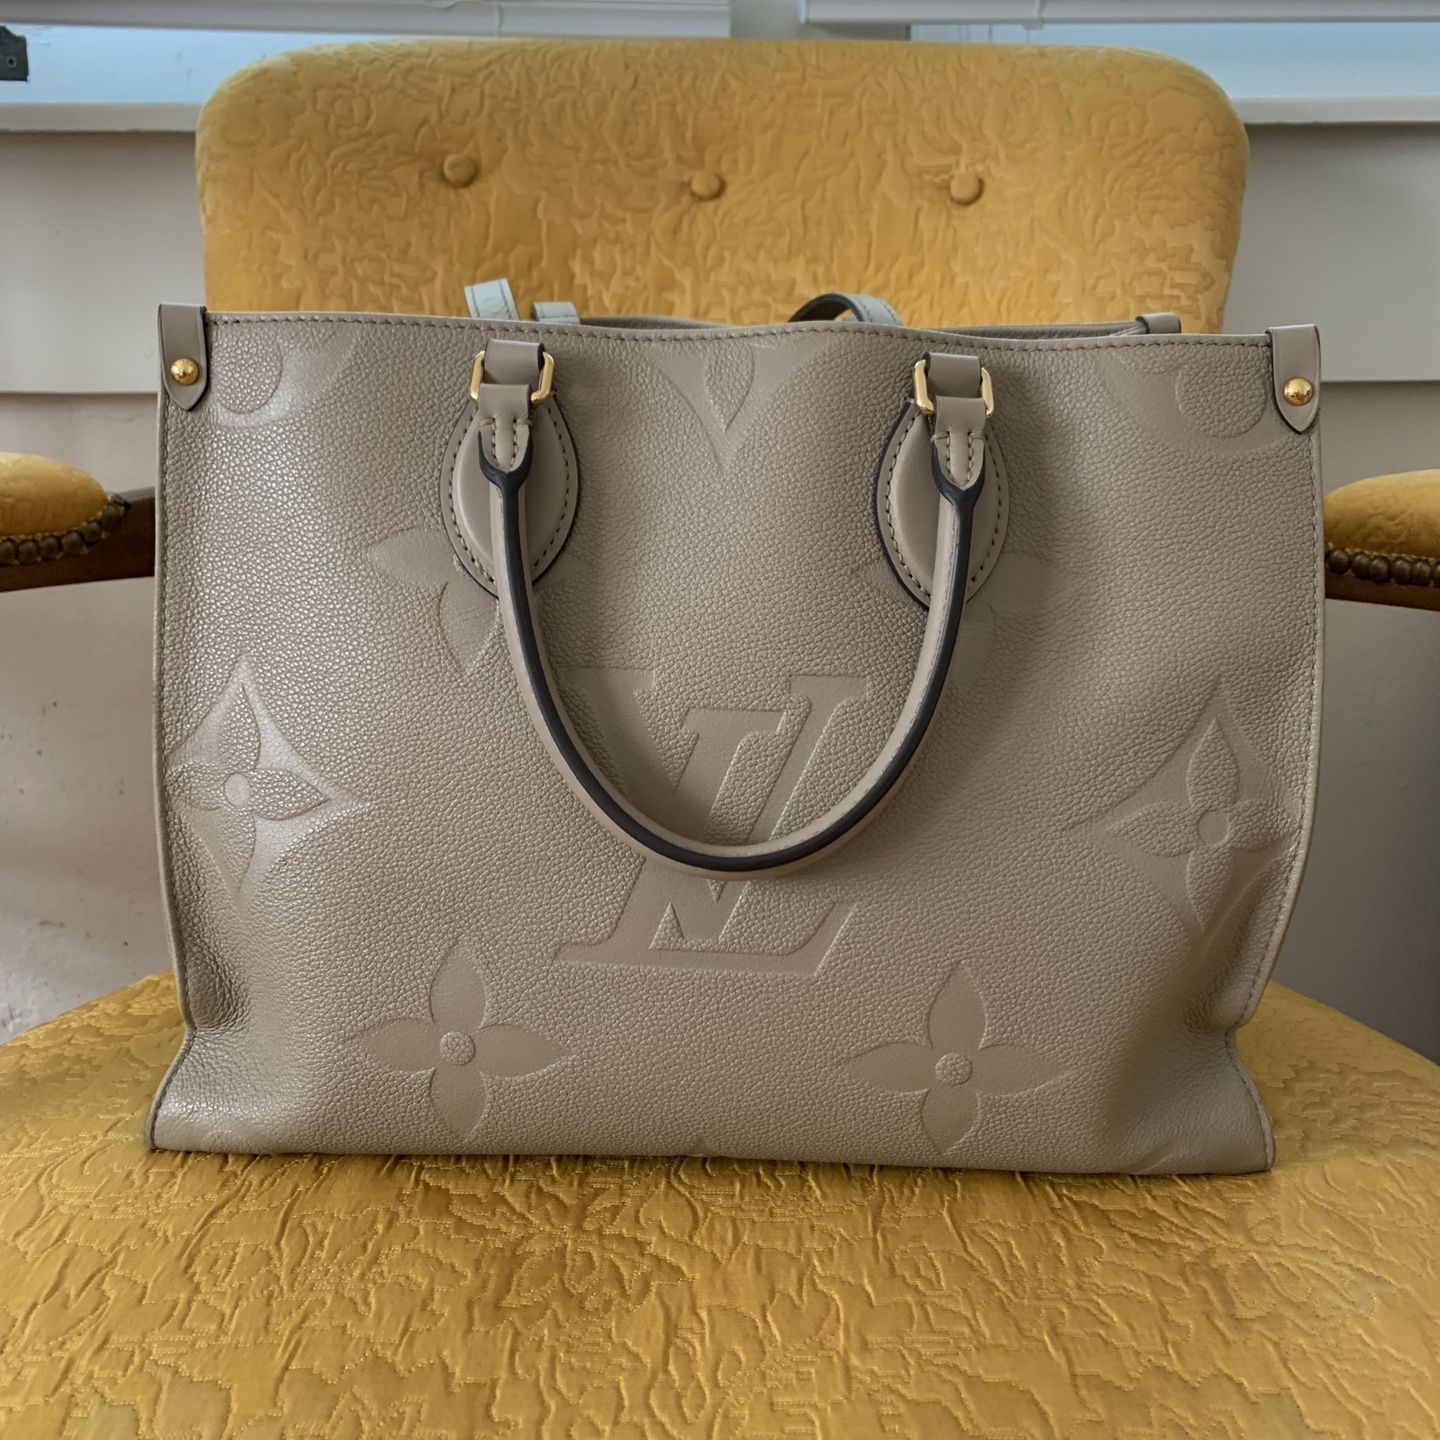 Louis Vuitton Authentic Bag for Sale in St. Petersburg, FL - OfferUp